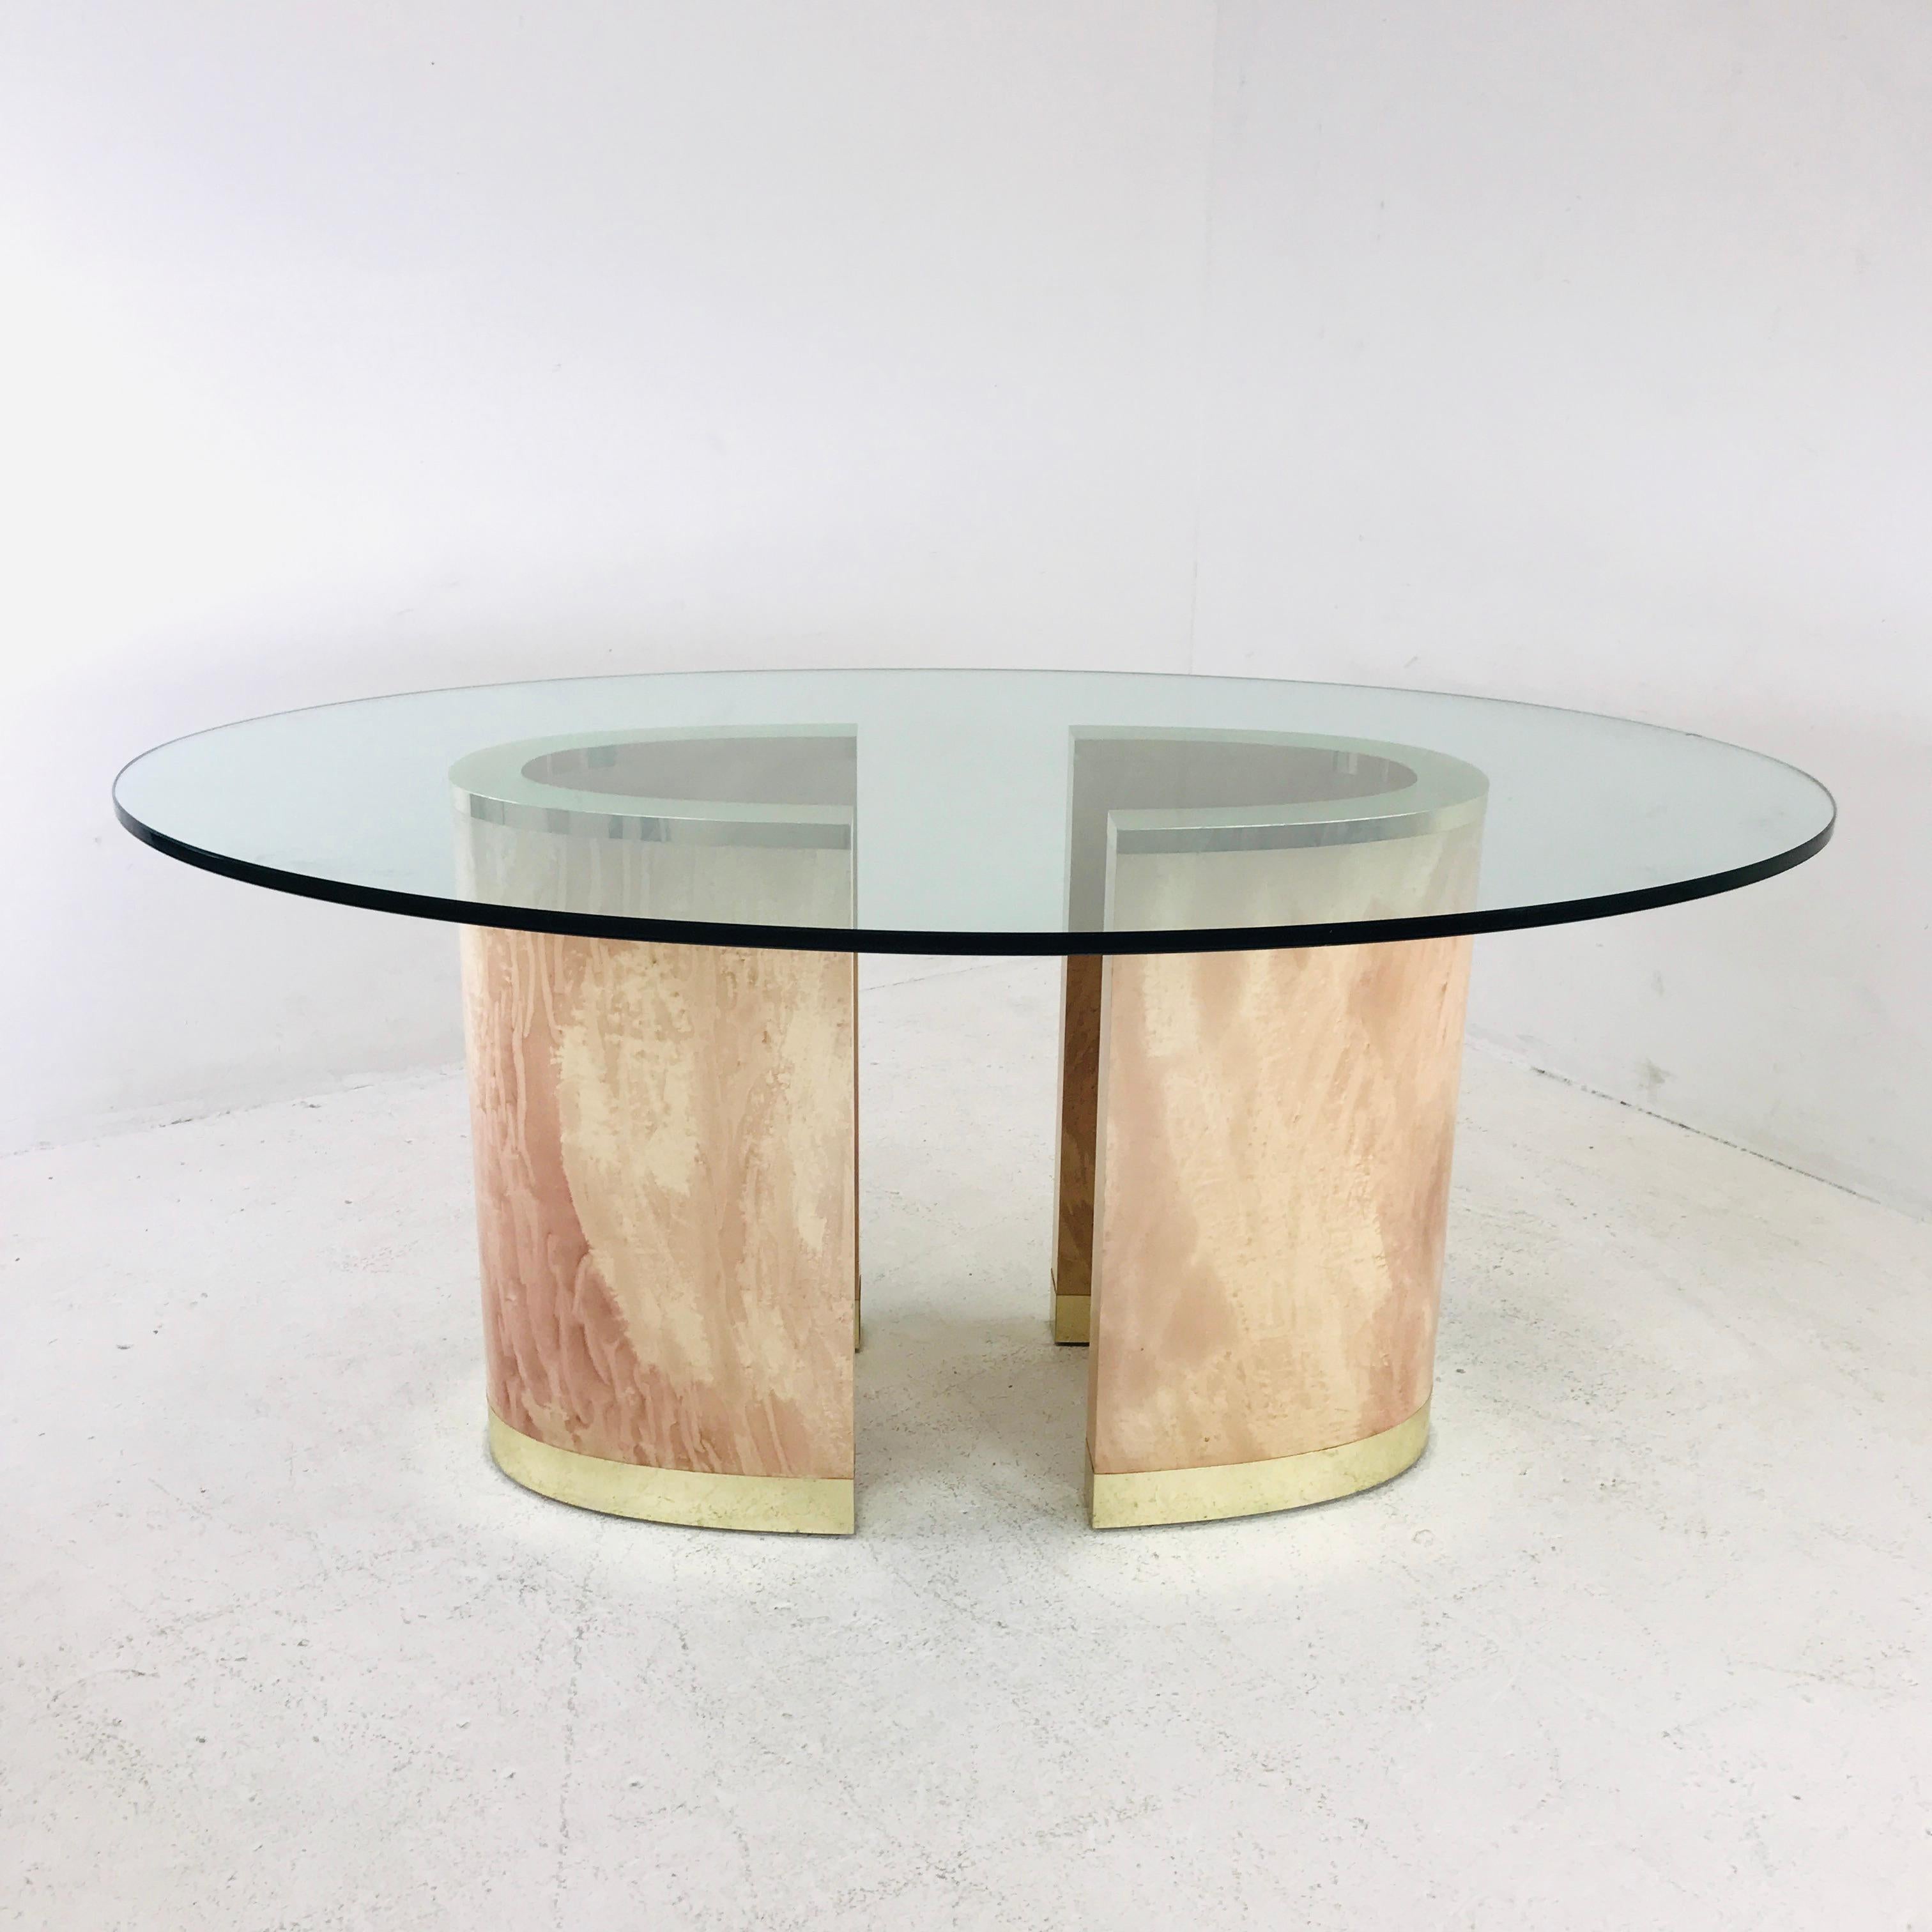 Stunning 1980s 2 piece pedestal base dining table with oval glass top. Unique pair of wood/faux finish pedestal bases can be reconfigured for the desired arrangement. Oval top has chip at one edge. Glass measures 68